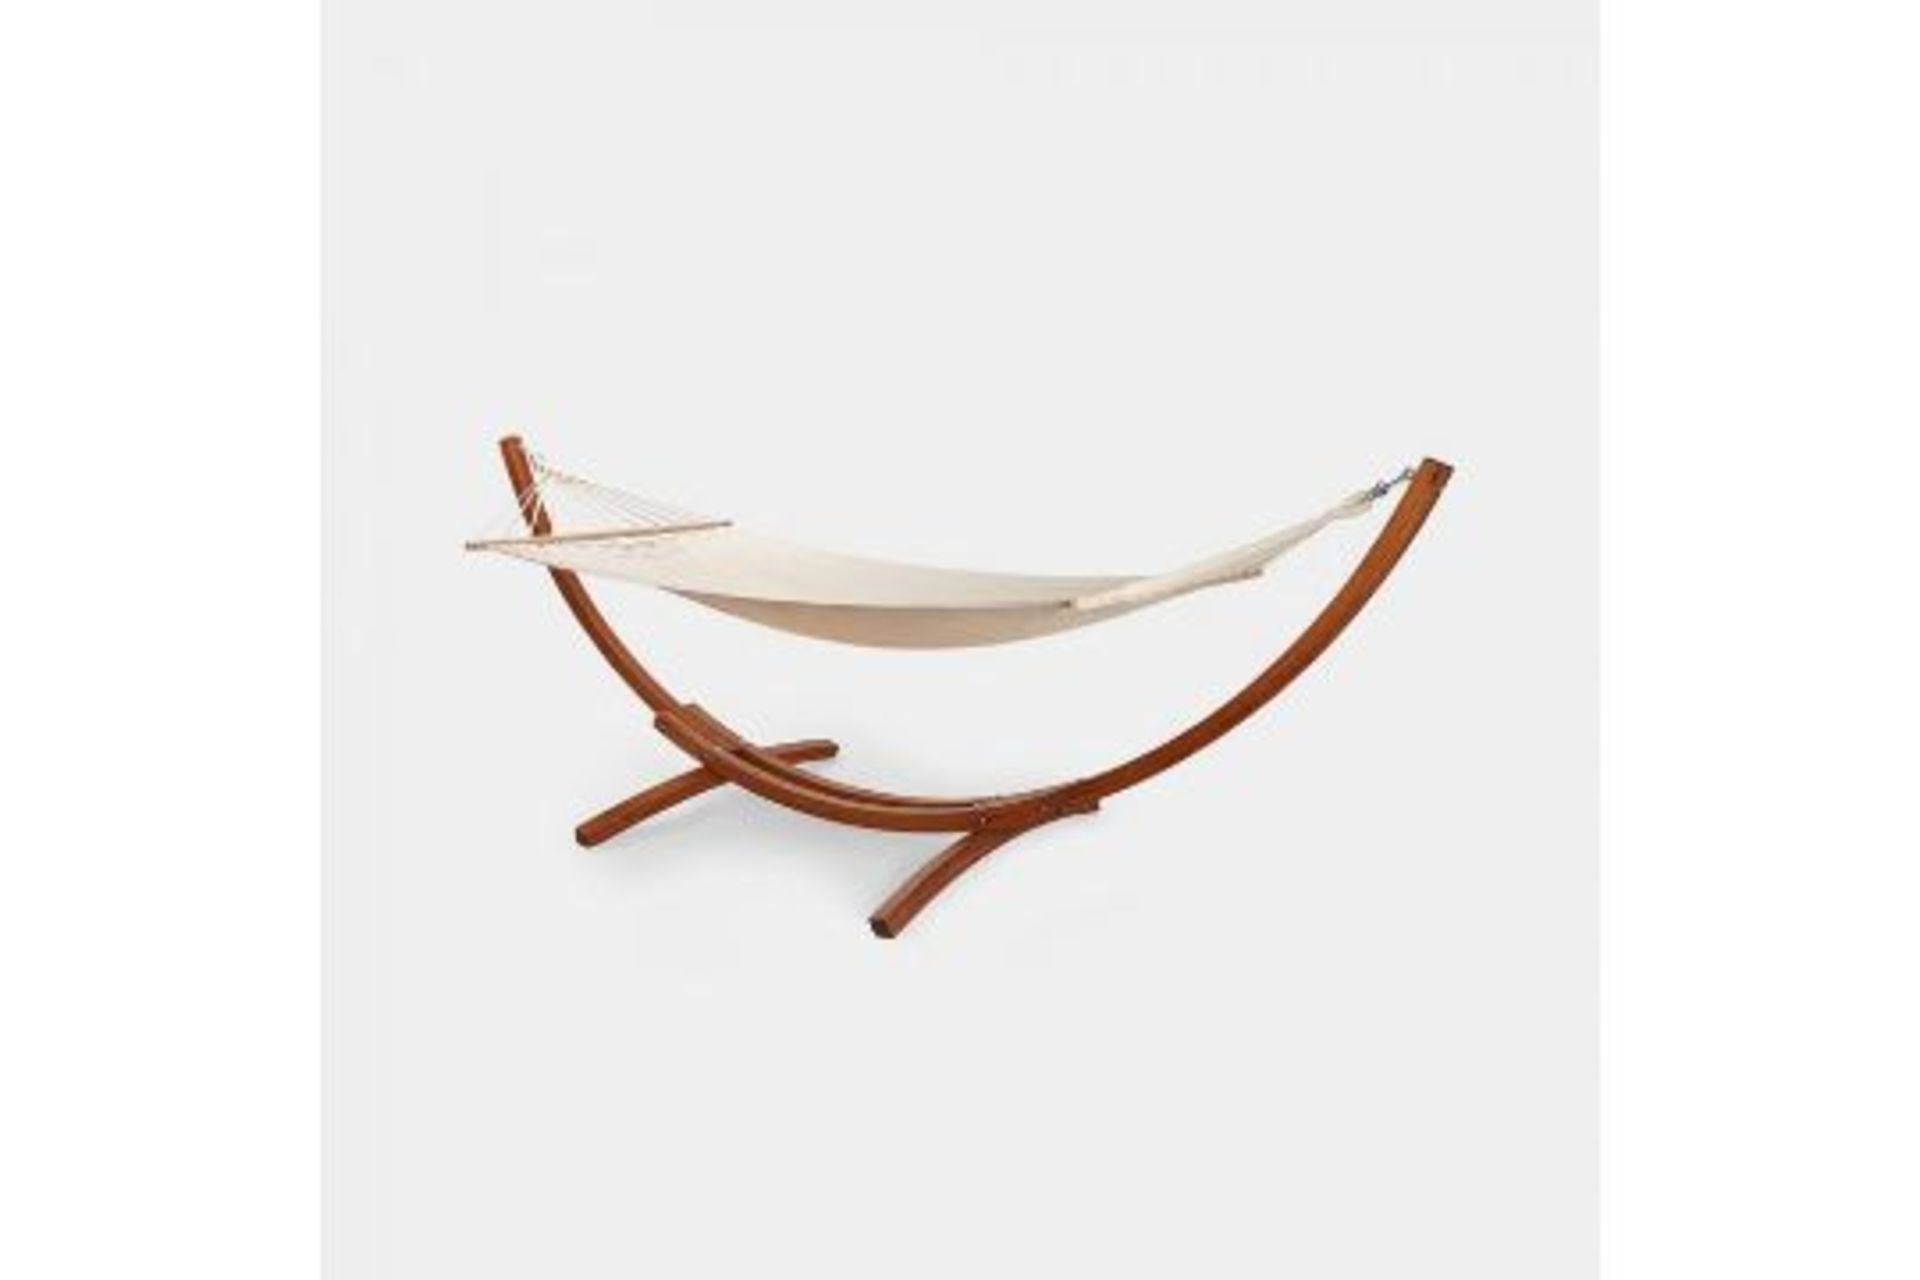 New Boxed - Luxe 1 Person Hammock with Wooden Frame. Relax in the sun and enjoy your outdoor